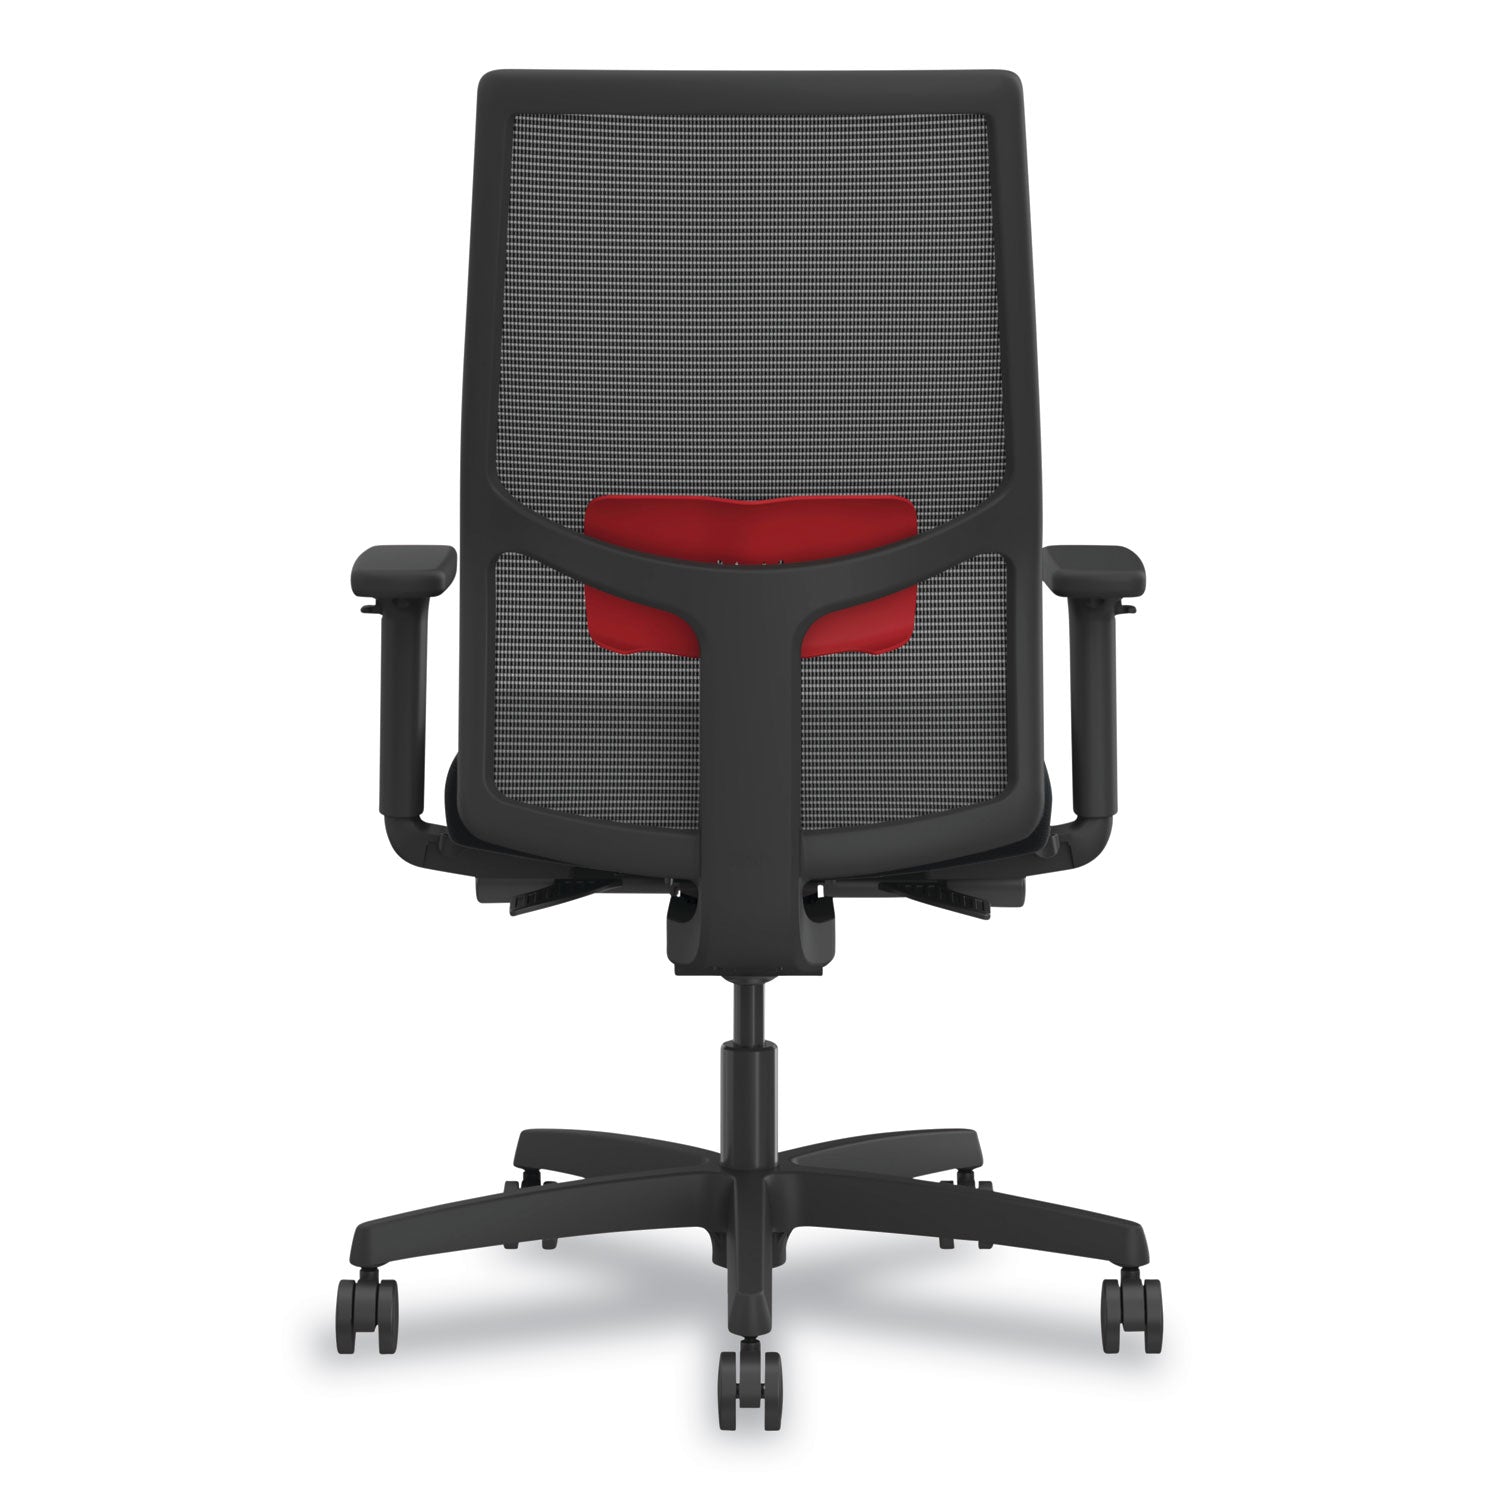 ignition-20-4-way-stretch-mid-back-mesh-task-chair-red-adjustable-lumbar-support-black-ships-in-7-10-business-days_honi2mm2amc10yt - 2